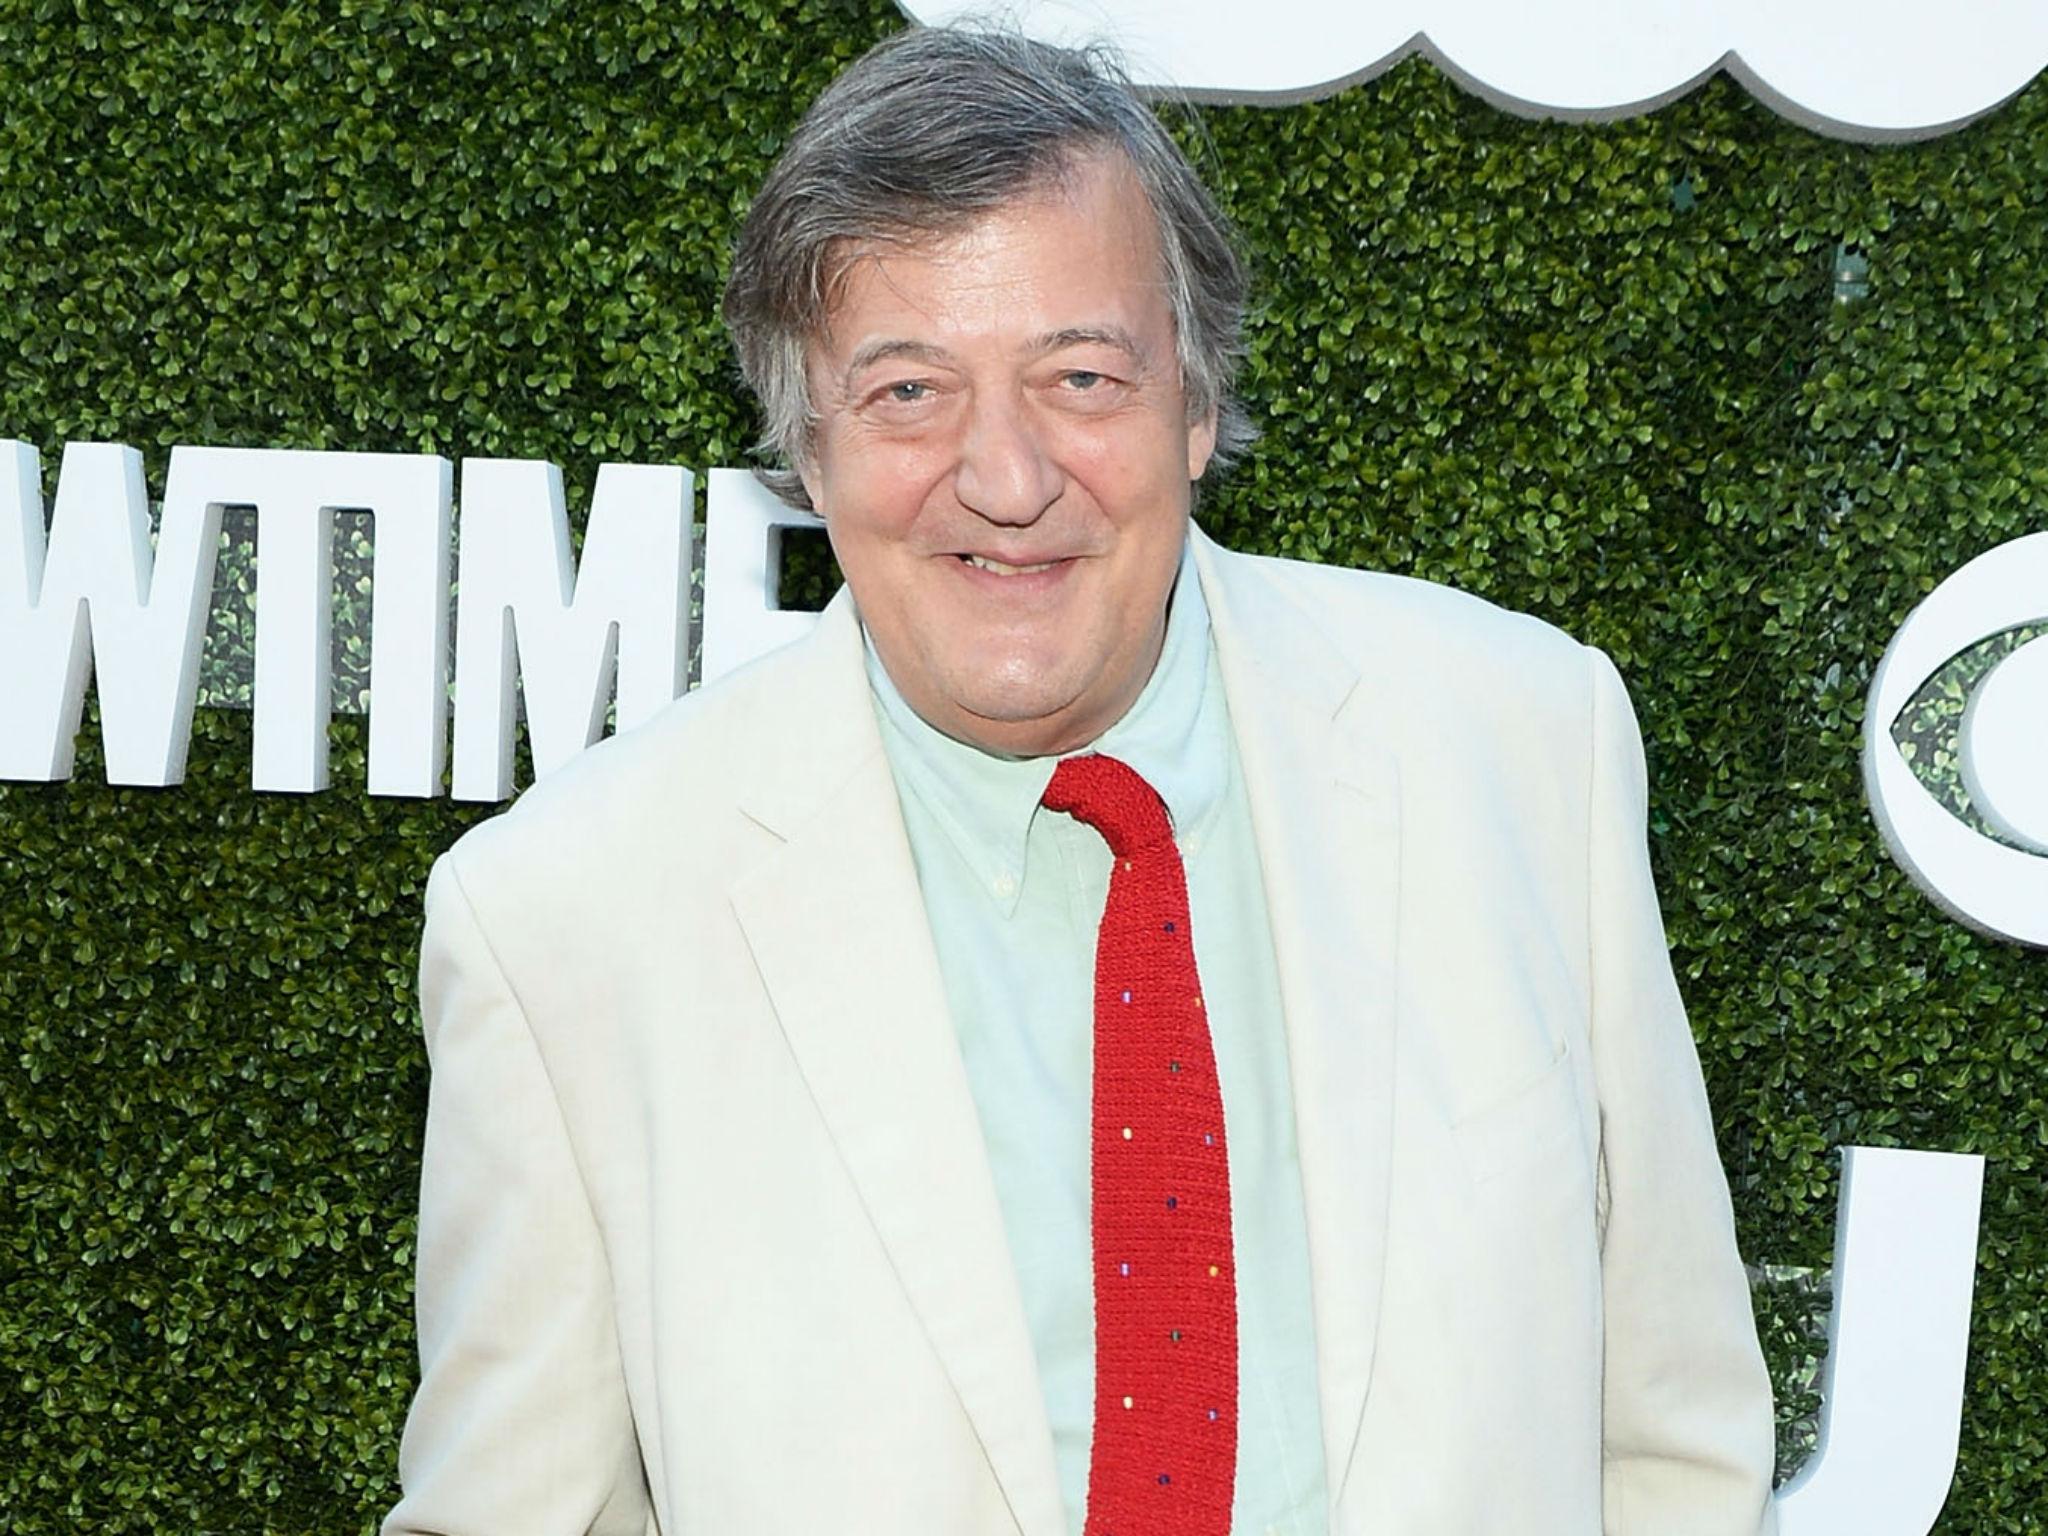 Stephen Fry calls for more to be done to help vulnerable young people sleeping rough on the streets